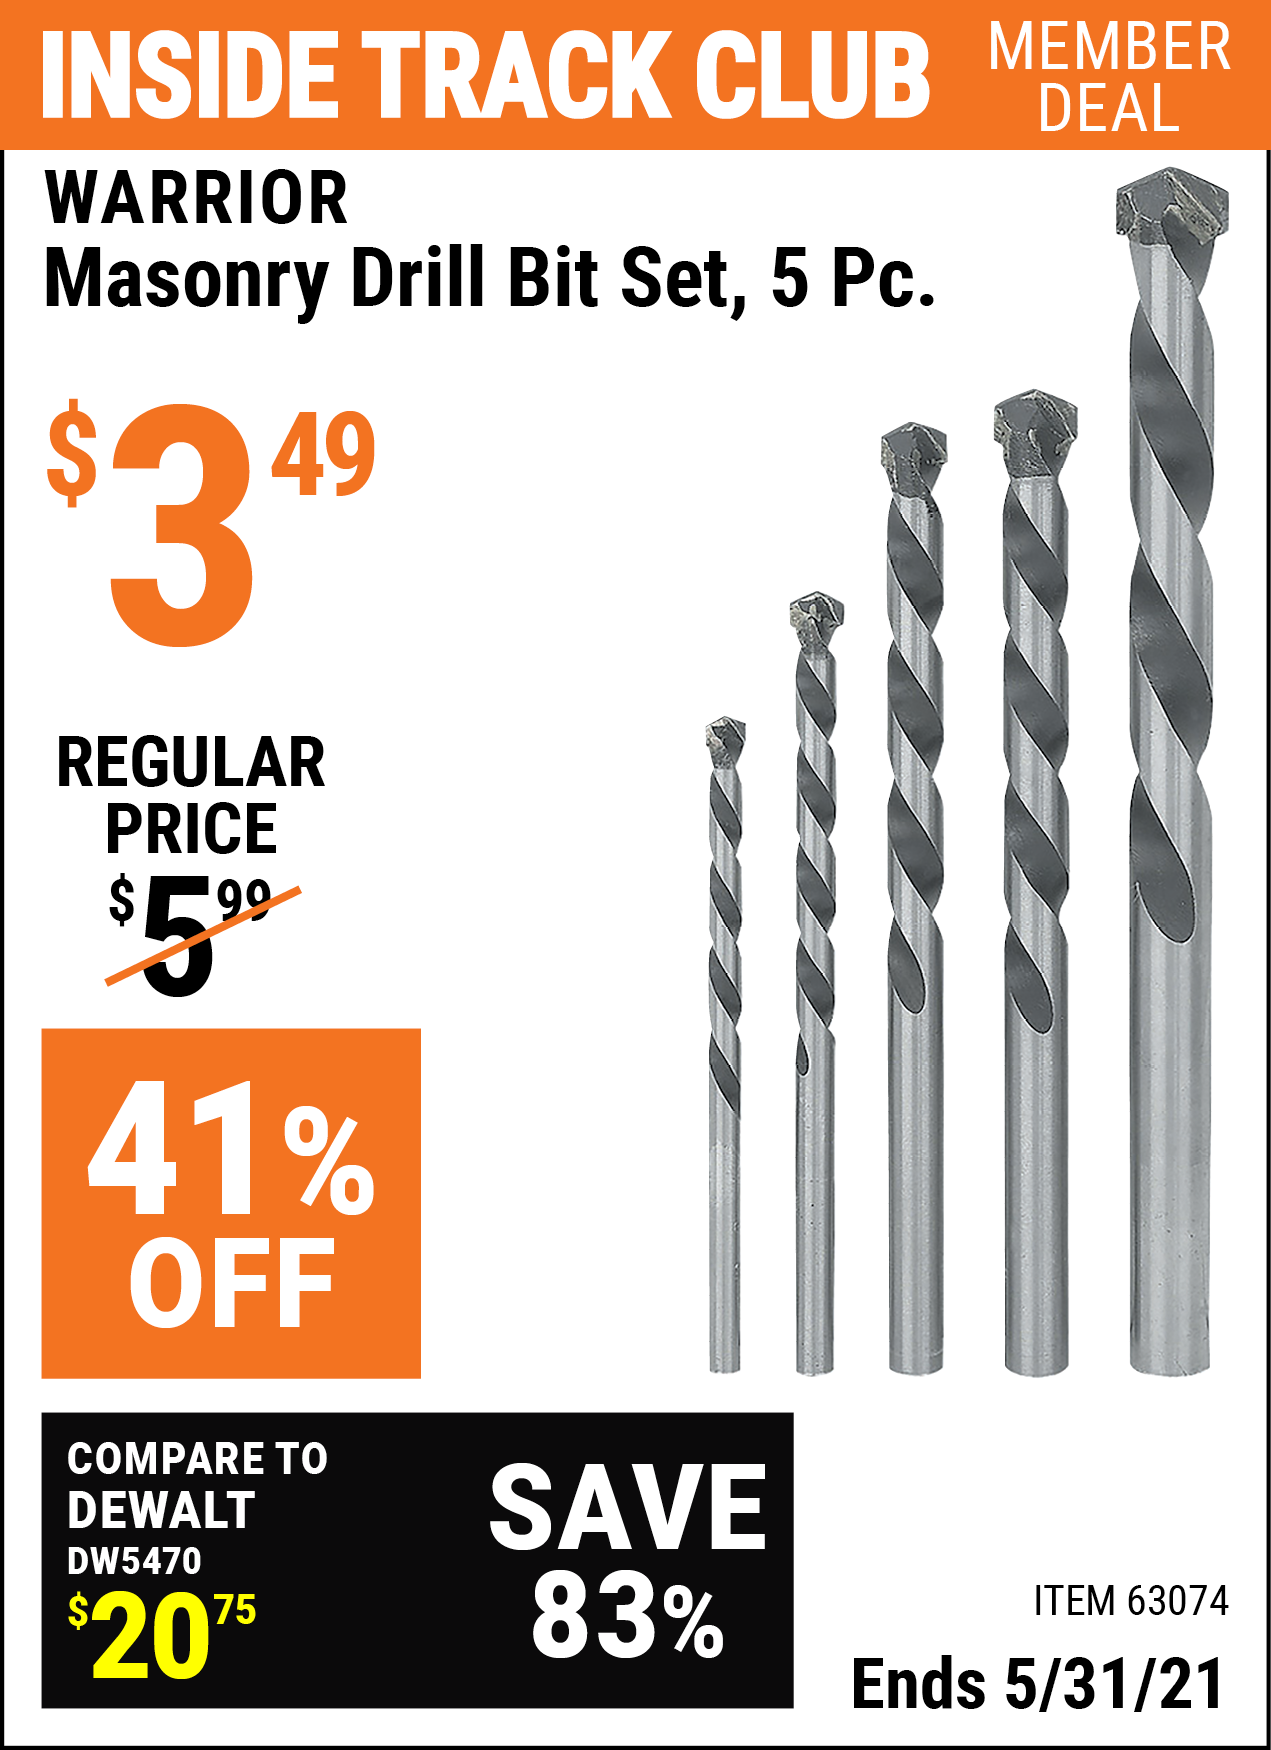 Inside Track Club members can buy the WARRIOR Masonry Drill Bit Set 5 Pc. (Item 63074) for $3.49, valid through 5/31/2021.